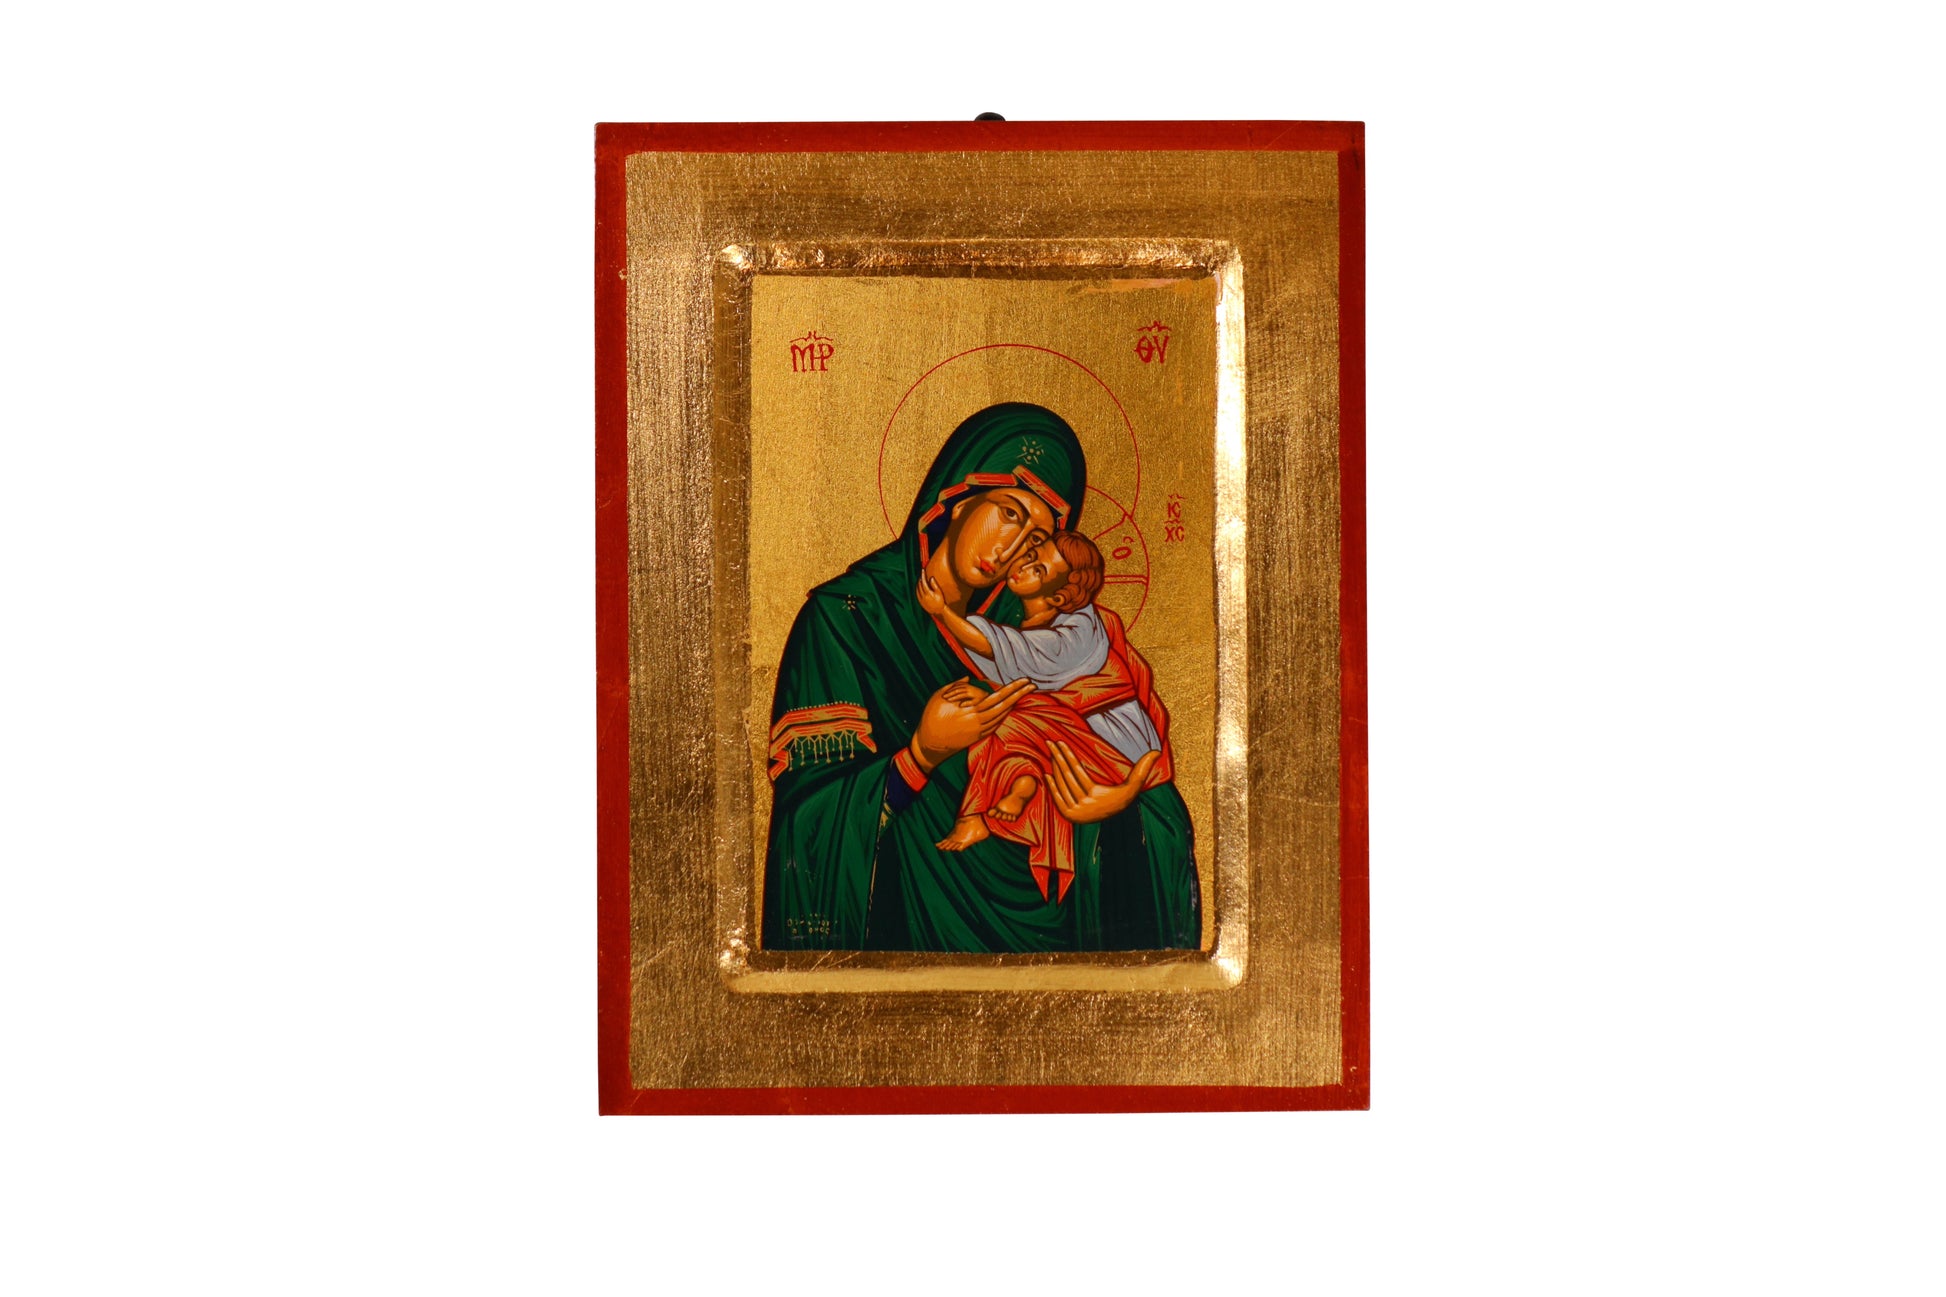 A hand-painted icon of the Virgin Mary in a green robe cradling the infant Jesus against a golden background, within a red frame. Mary has a contemplative expression and a halo inscribed with "MP OY," while Jesus looks outward with a hand raised in blessing and a halo with a cross.